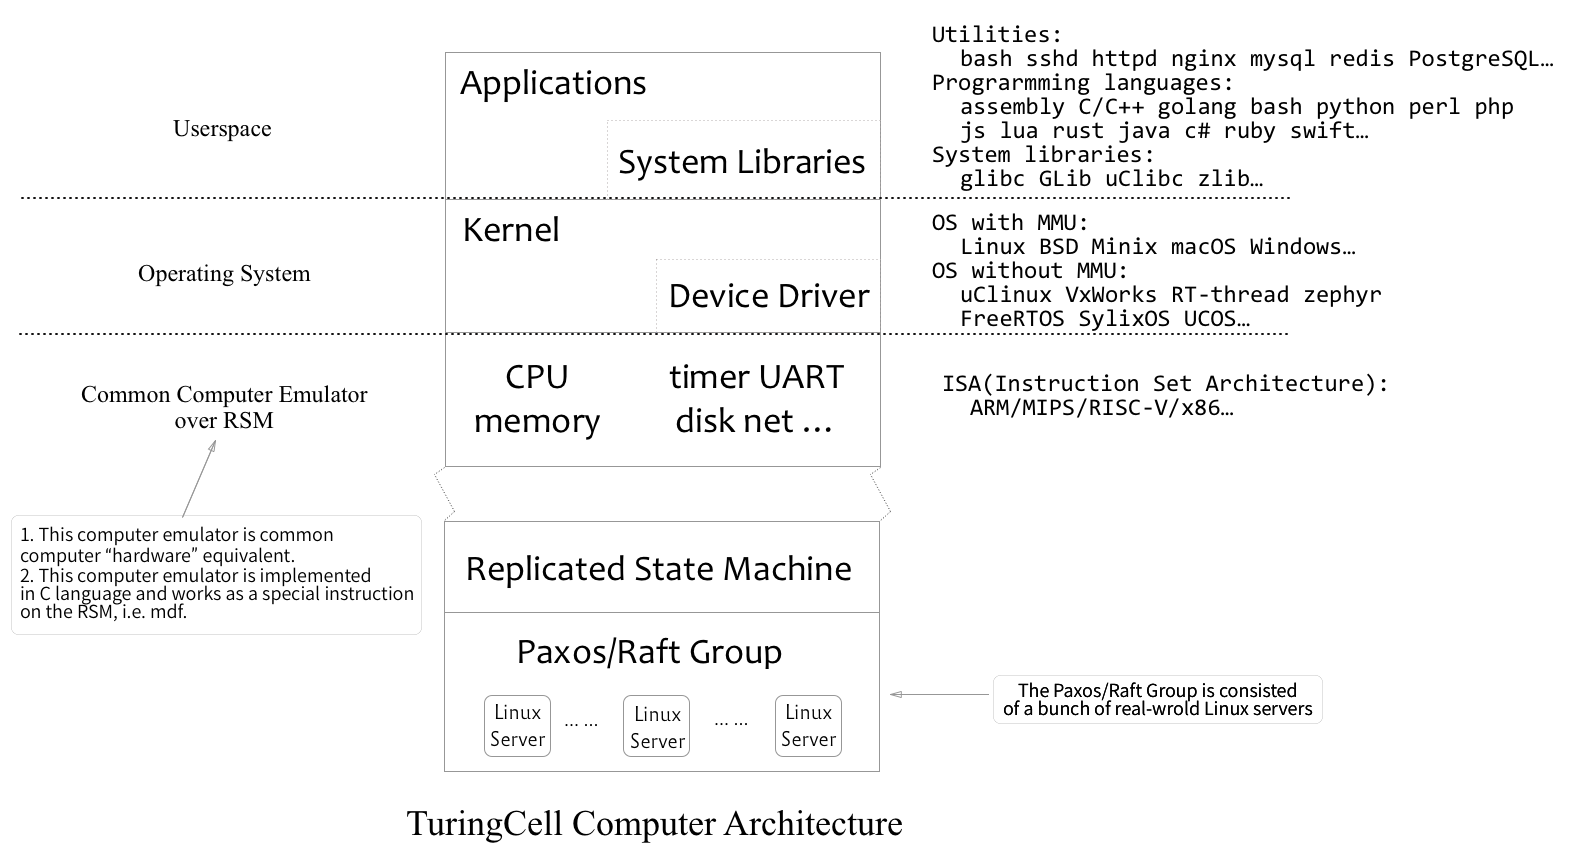 turingcell_computer_architecture